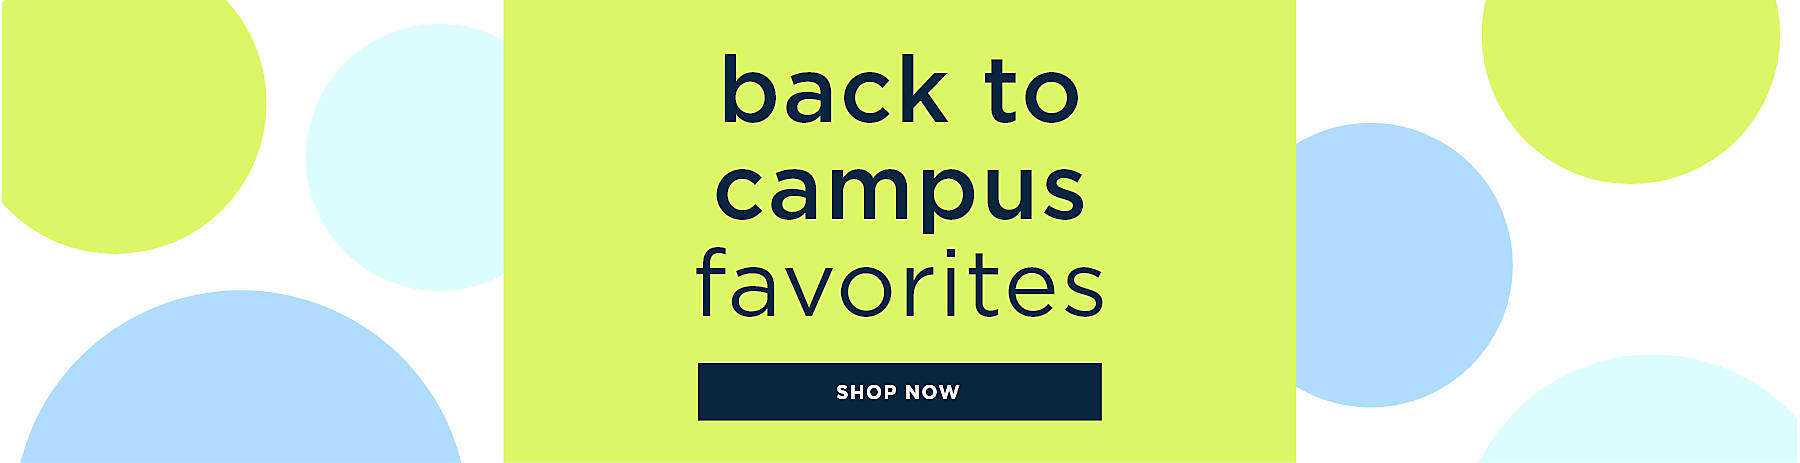 back to campus favorites shop now